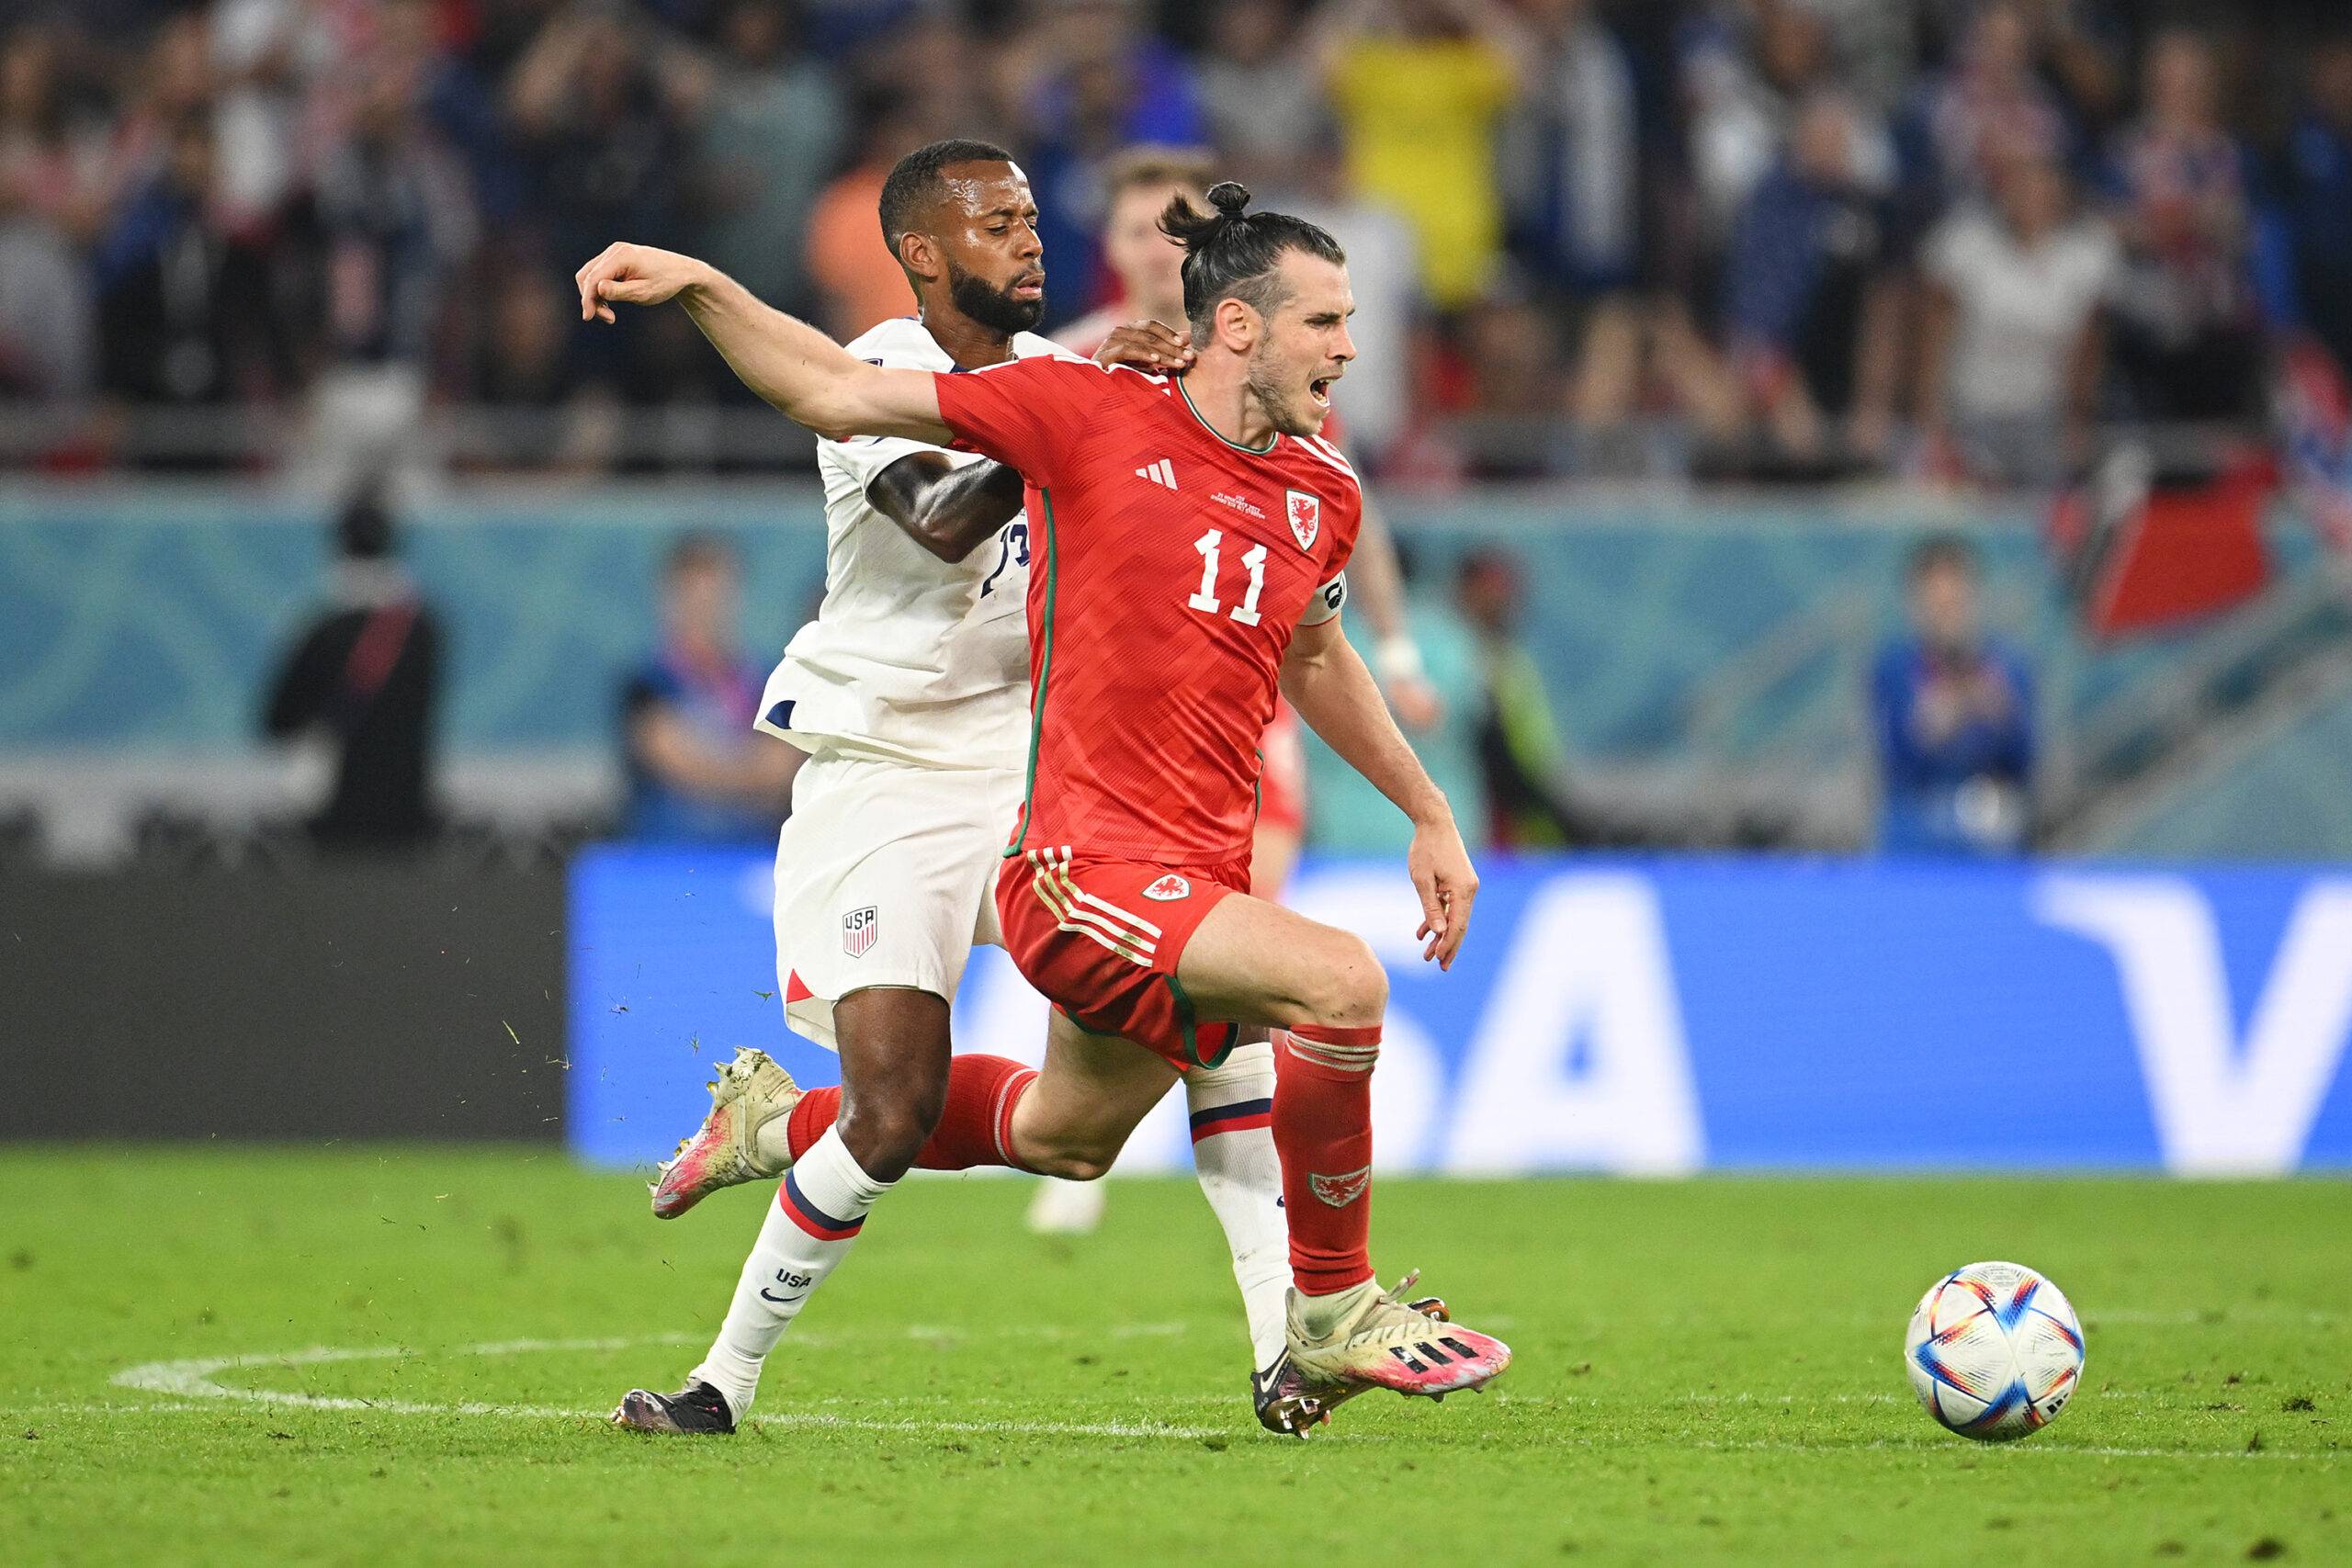 USA’s Kellyn Acosta hailed for tactical foul vs Gareth Bale - but it robbed us of epic WC moment